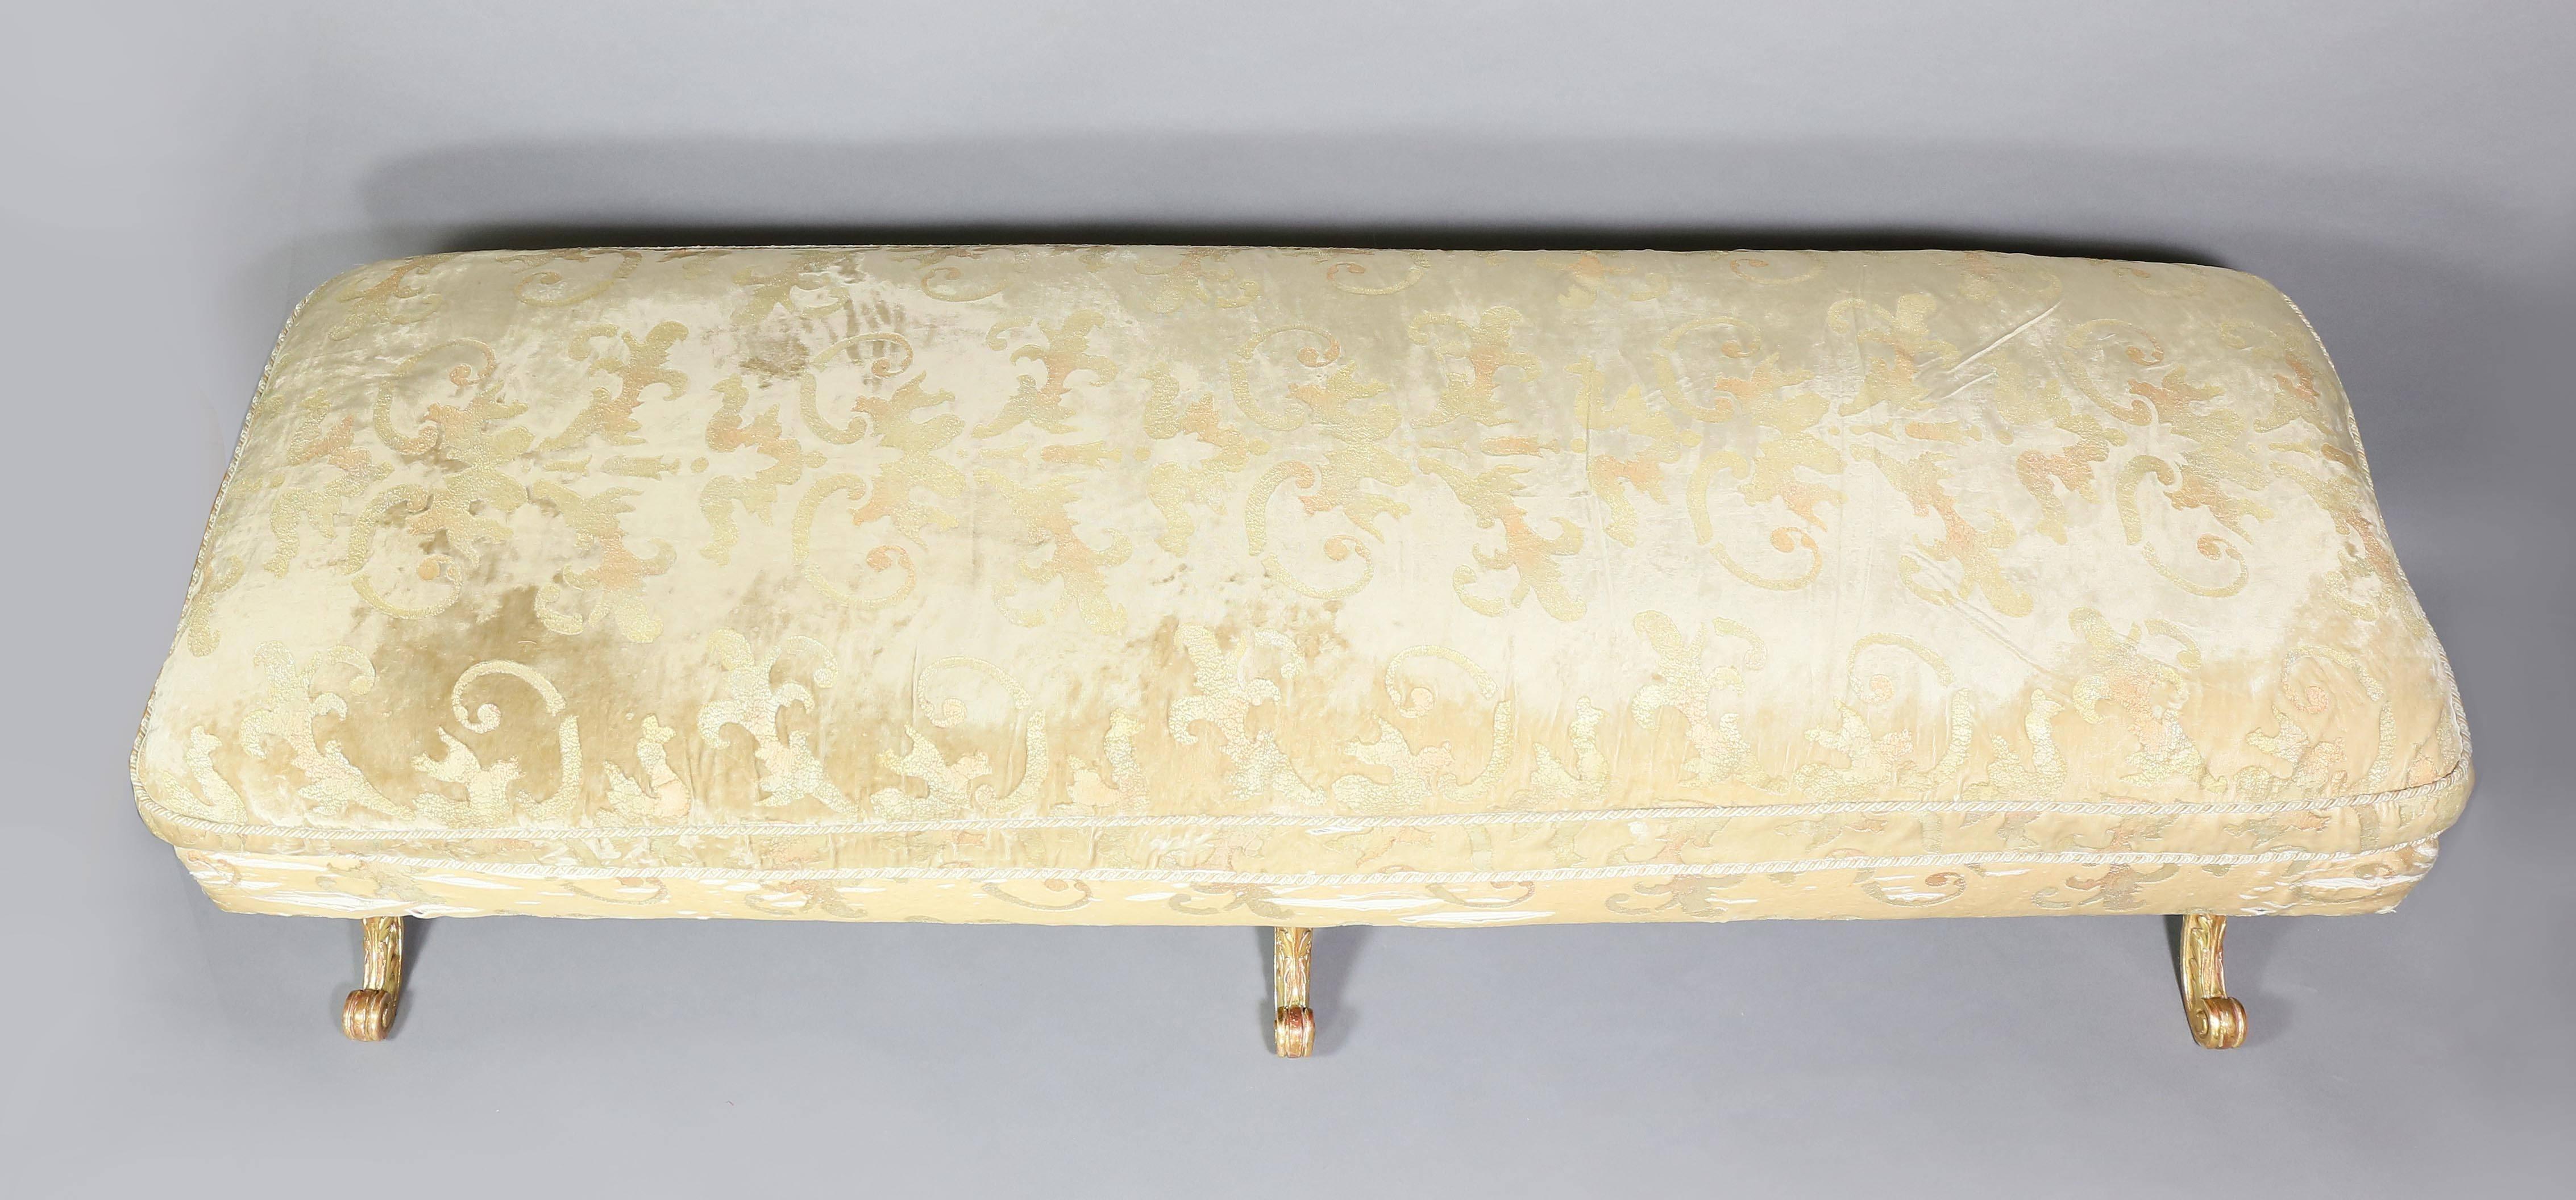 19th Century Pair of Louis XVI Style Giltwood Benches with Mirella Spinella Upholstery